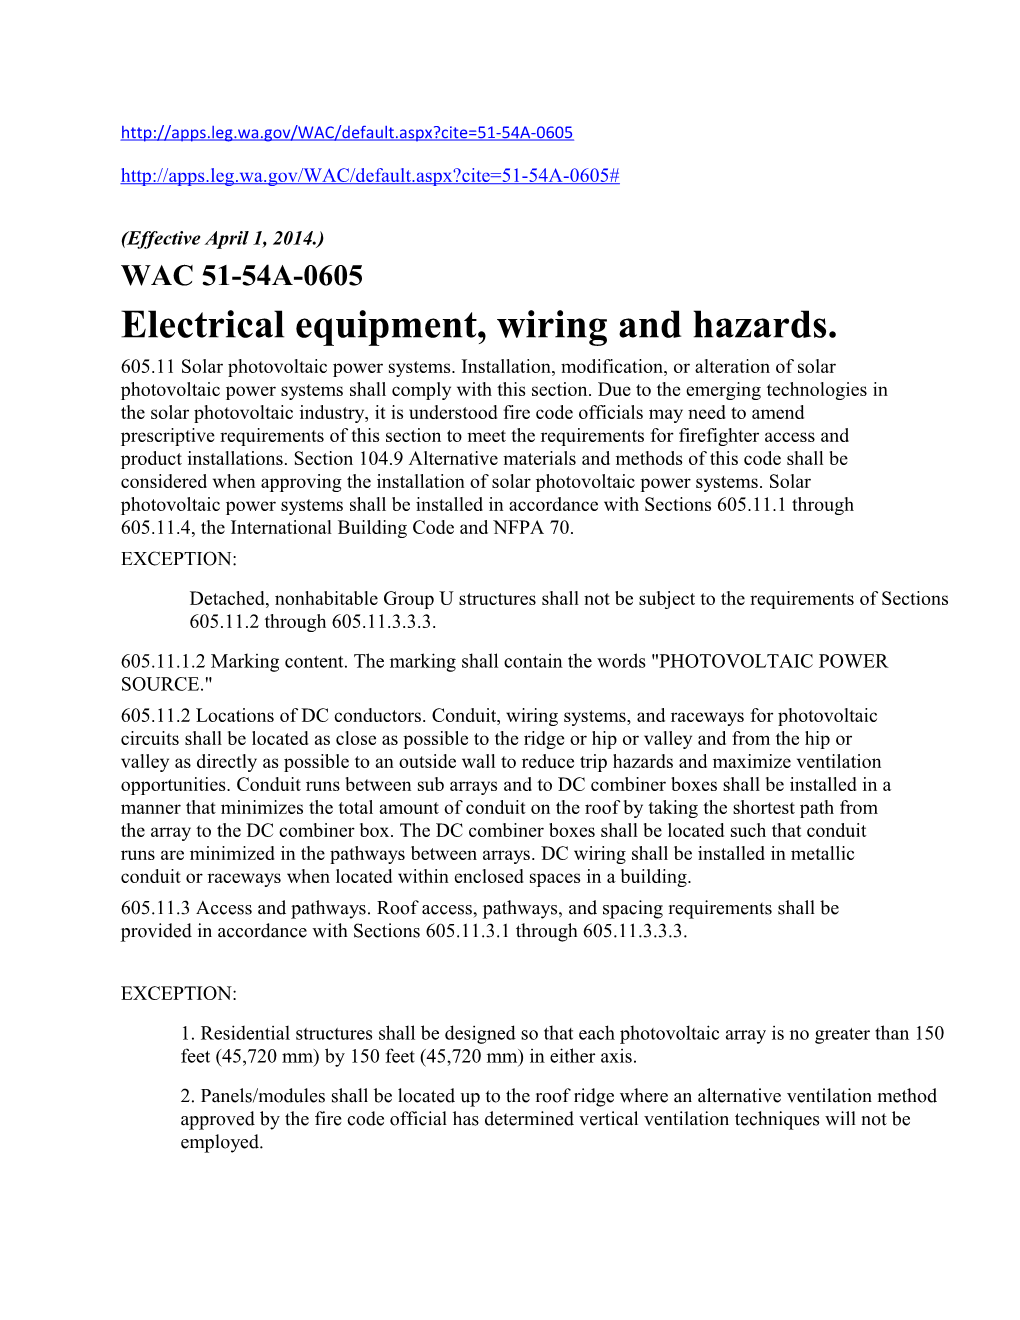 Electrical Equipment, Wiring and Hazards